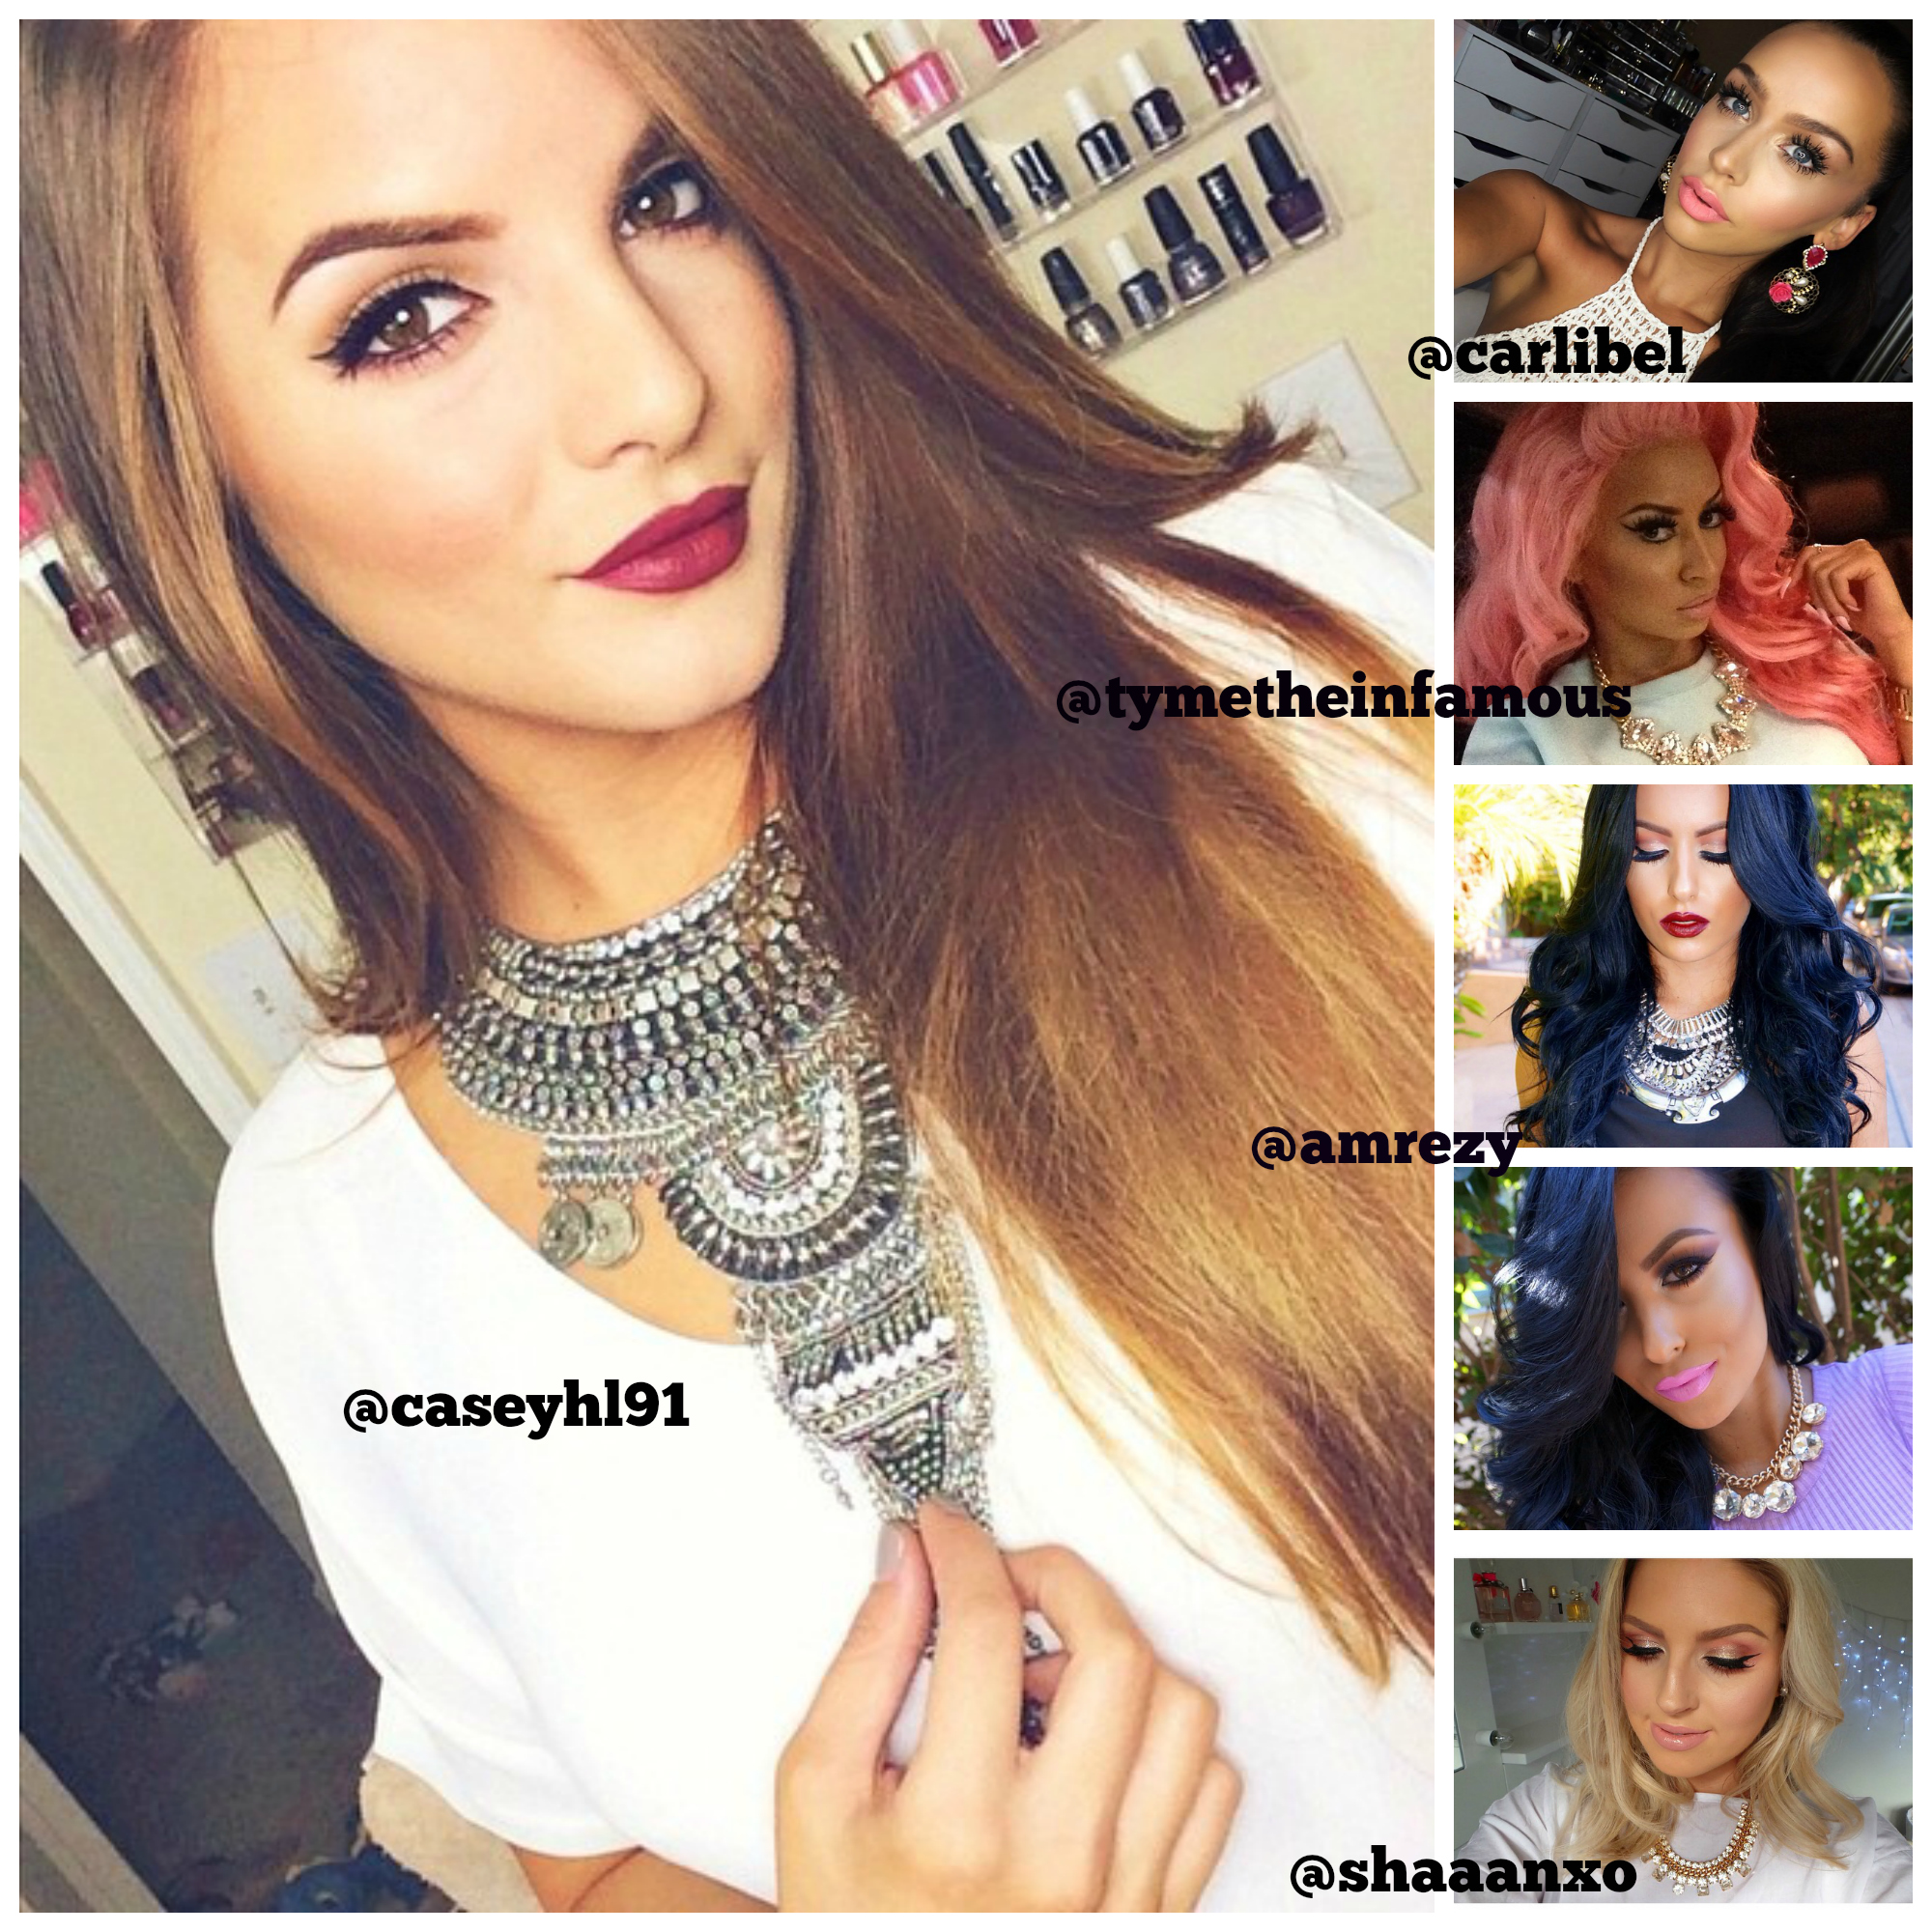 Here are some of my fave beauty girls (and their Instagram accounts where I found these pictures) rocking statement necklaces.